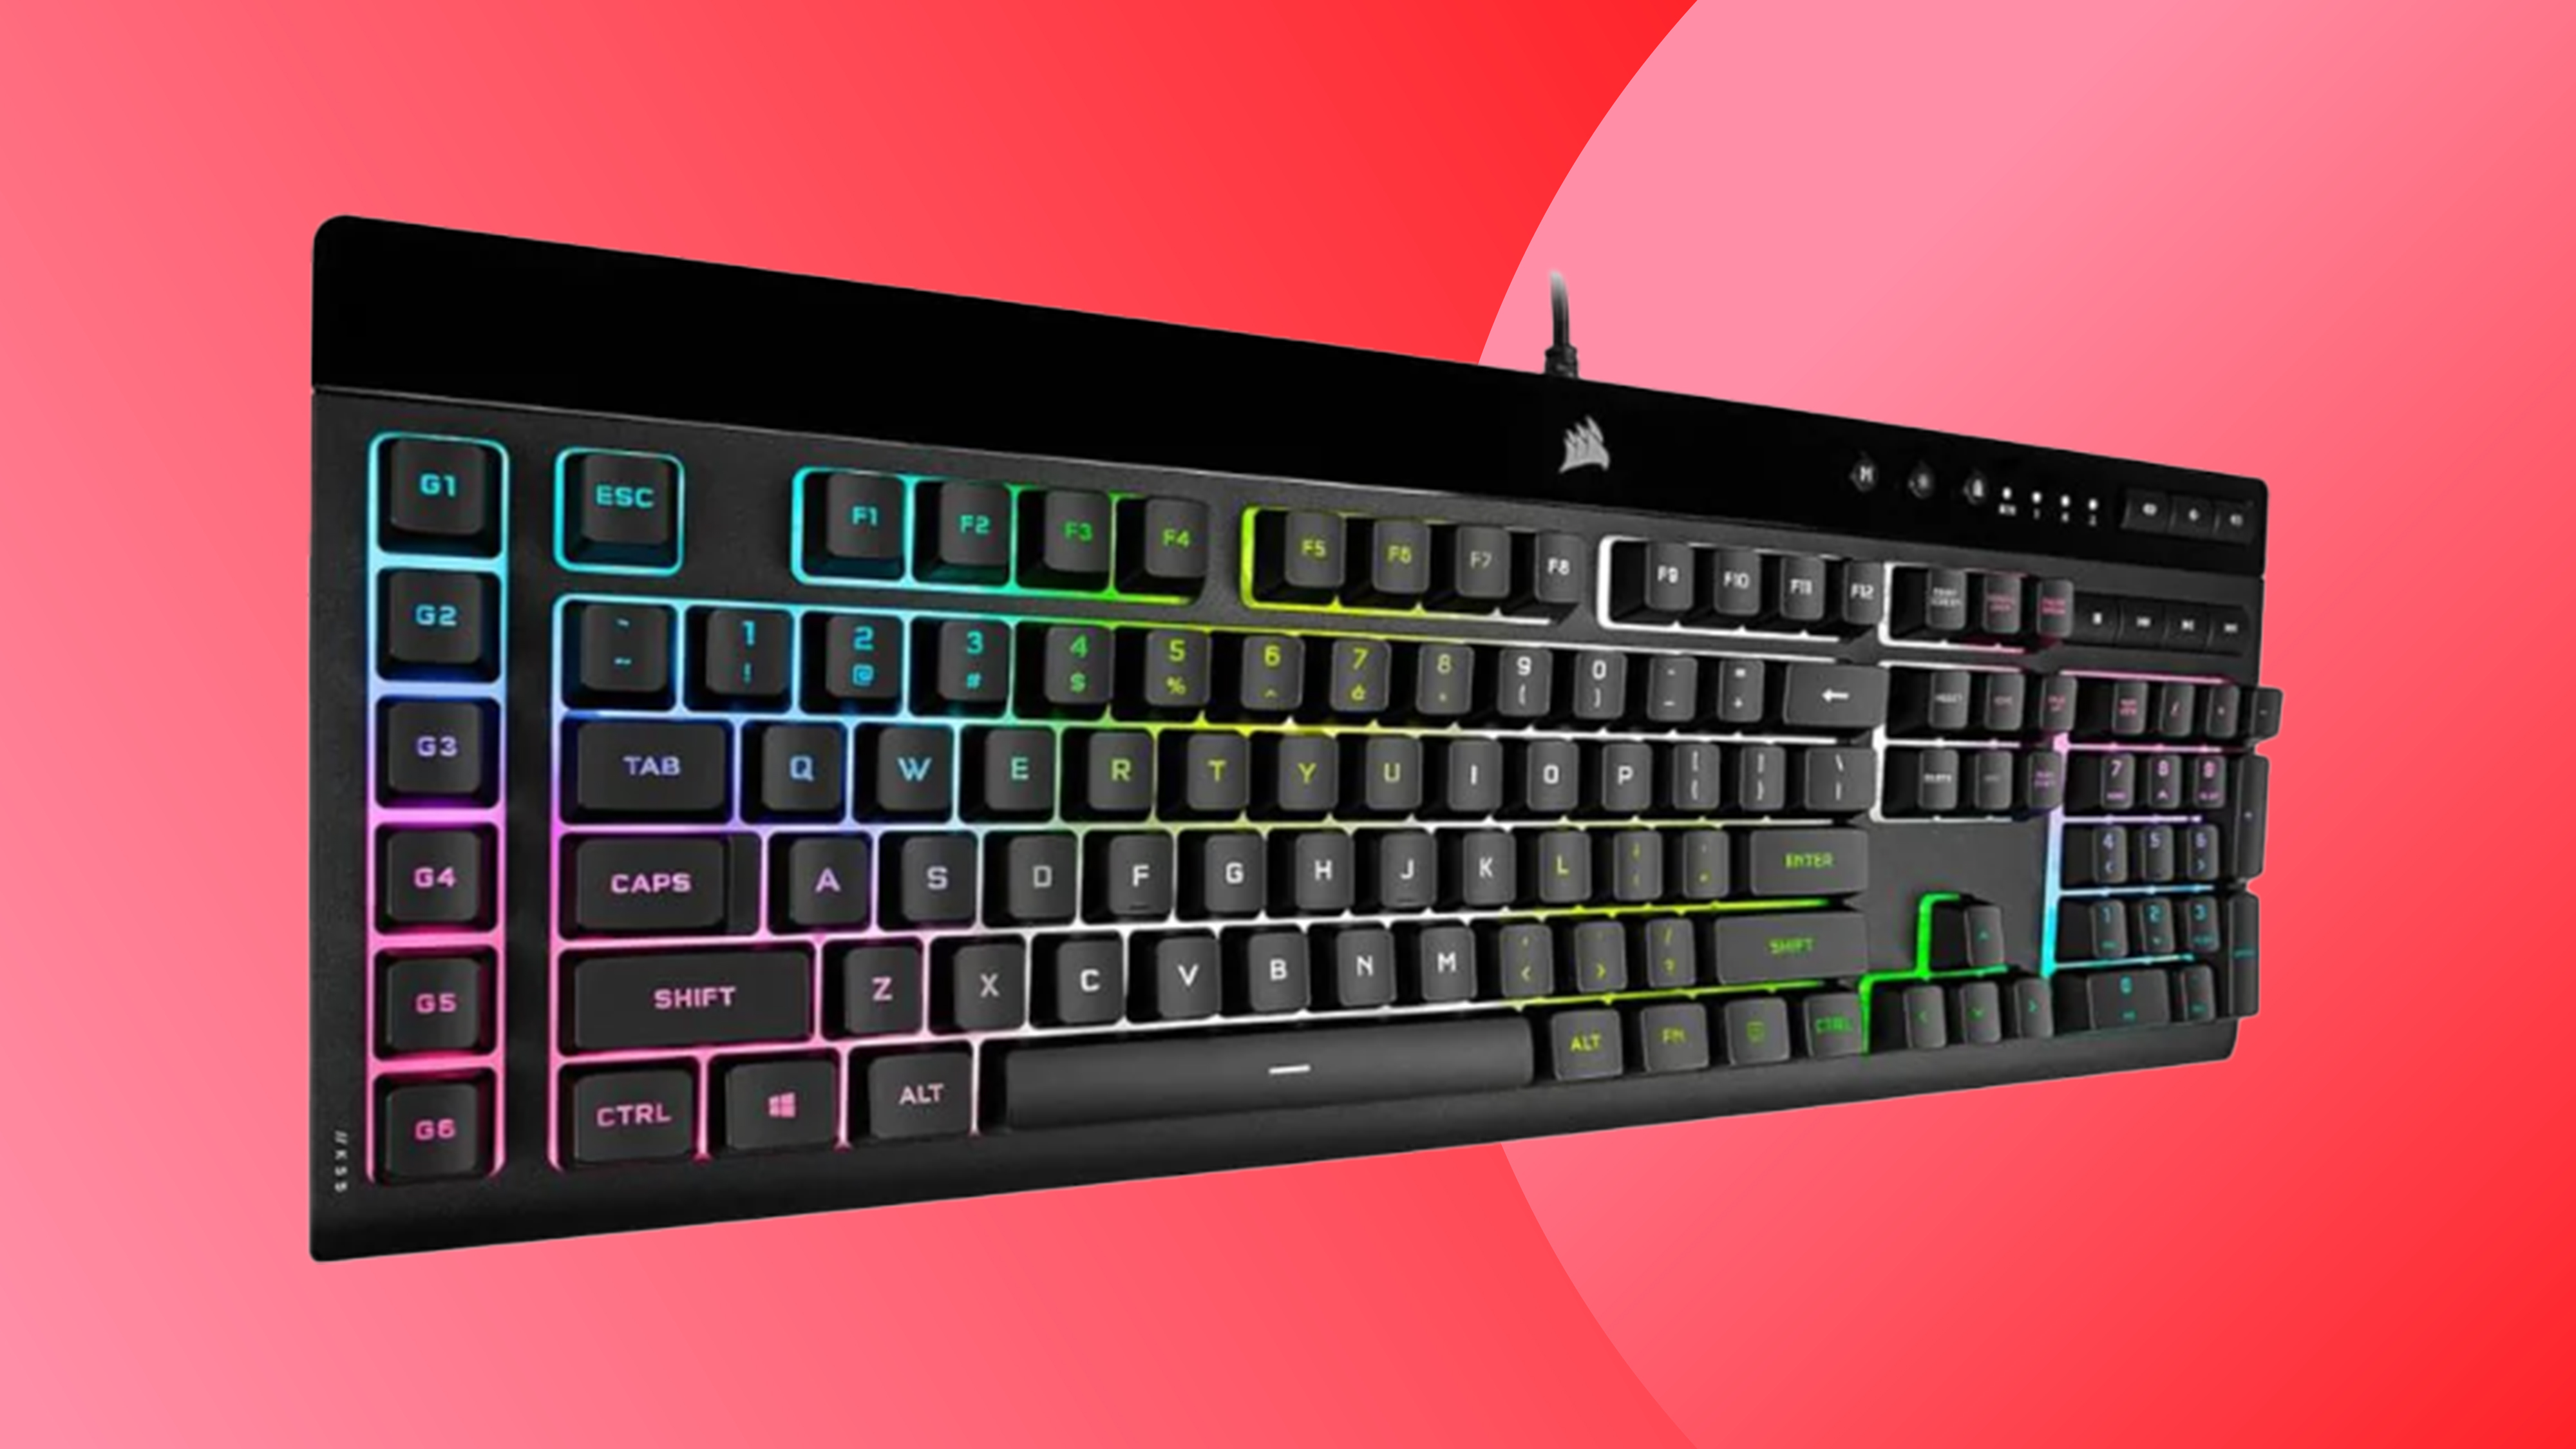 A Corsair Black Friday presents image with a Corsair K55 RGB Pro XT keyboard on a red background